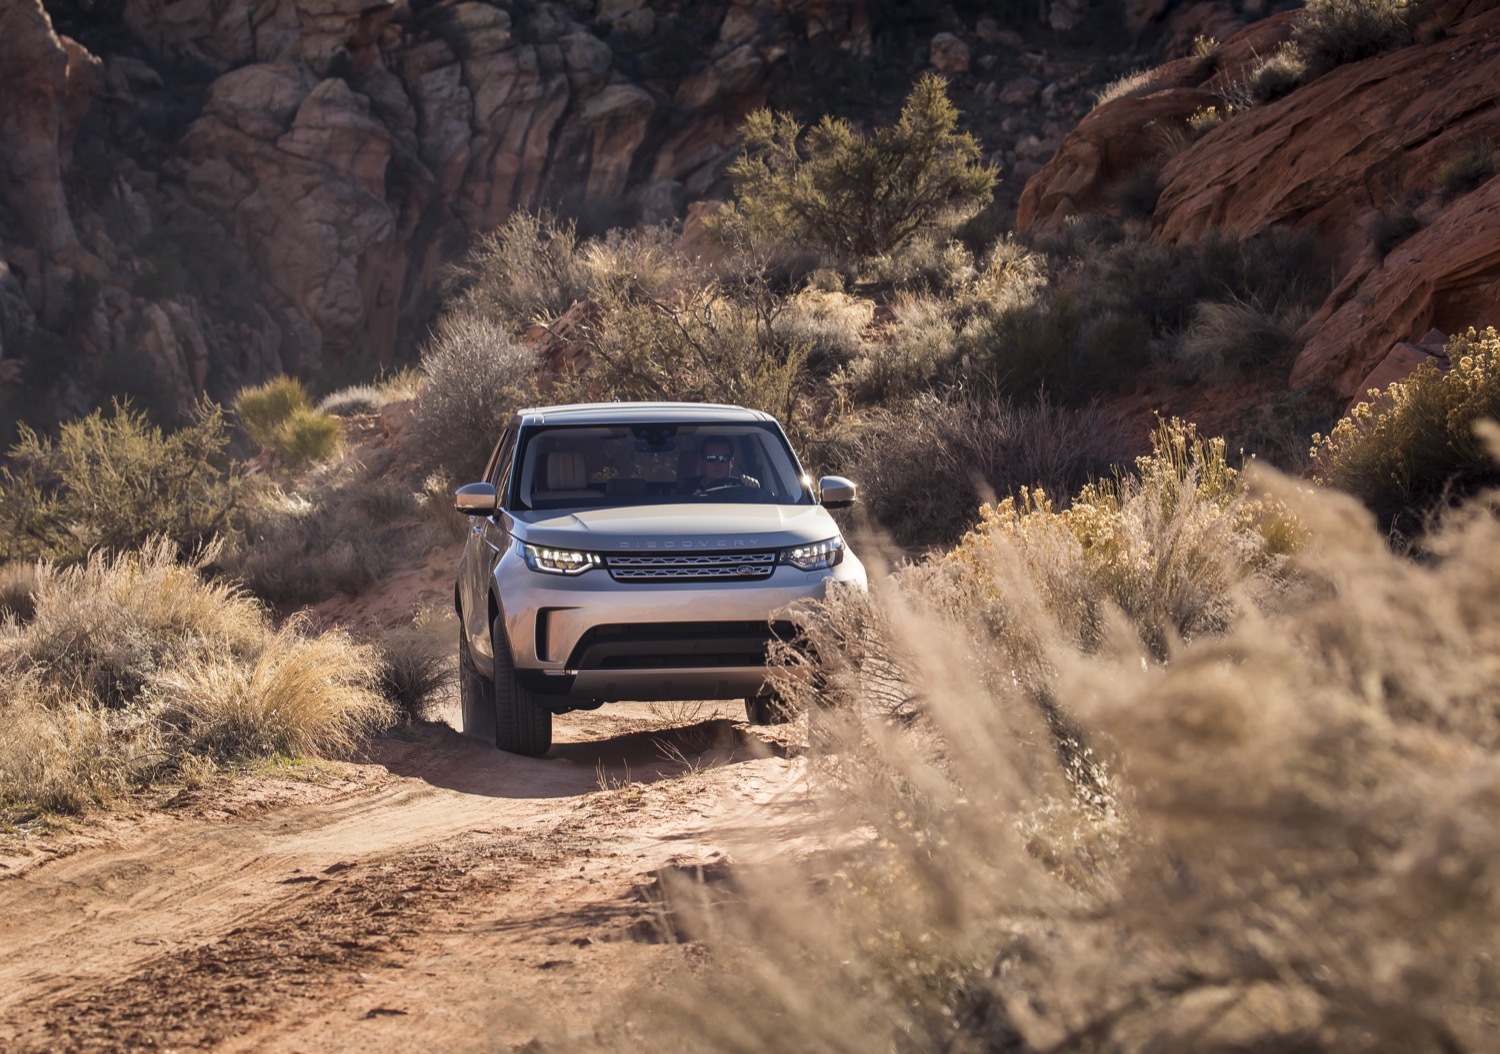 2018_land_rover_new_discovery_offroad_02